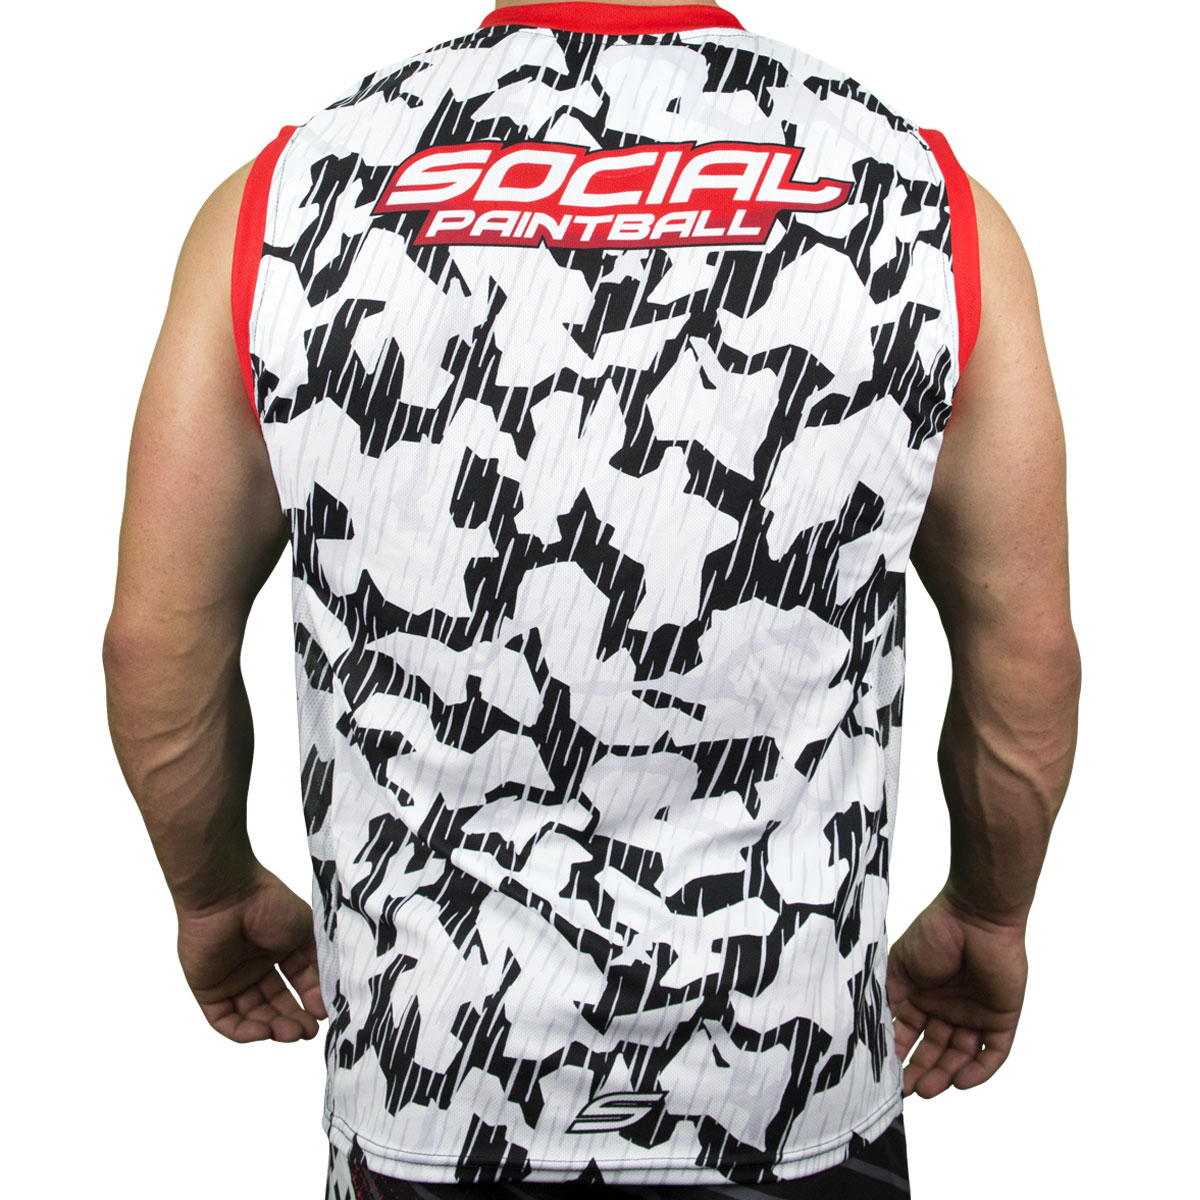 Social USA with Mesh Sides Social Paintball Sleeveless Jersey 